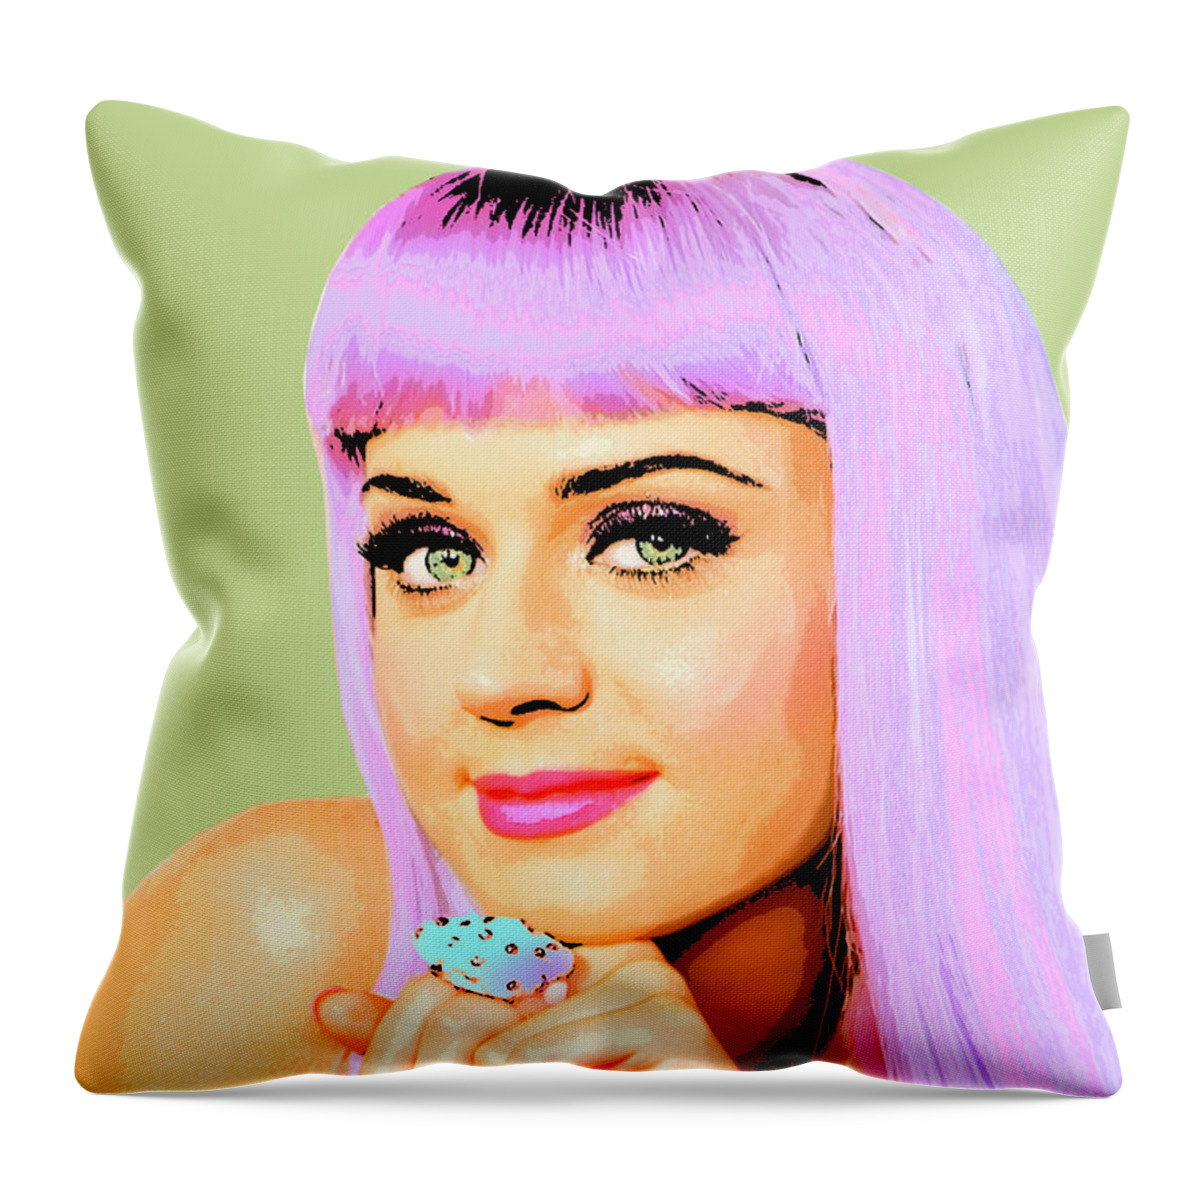 Katy Perry Throw Pillow featuring the photograph Katy Perry by Dominic Piperata